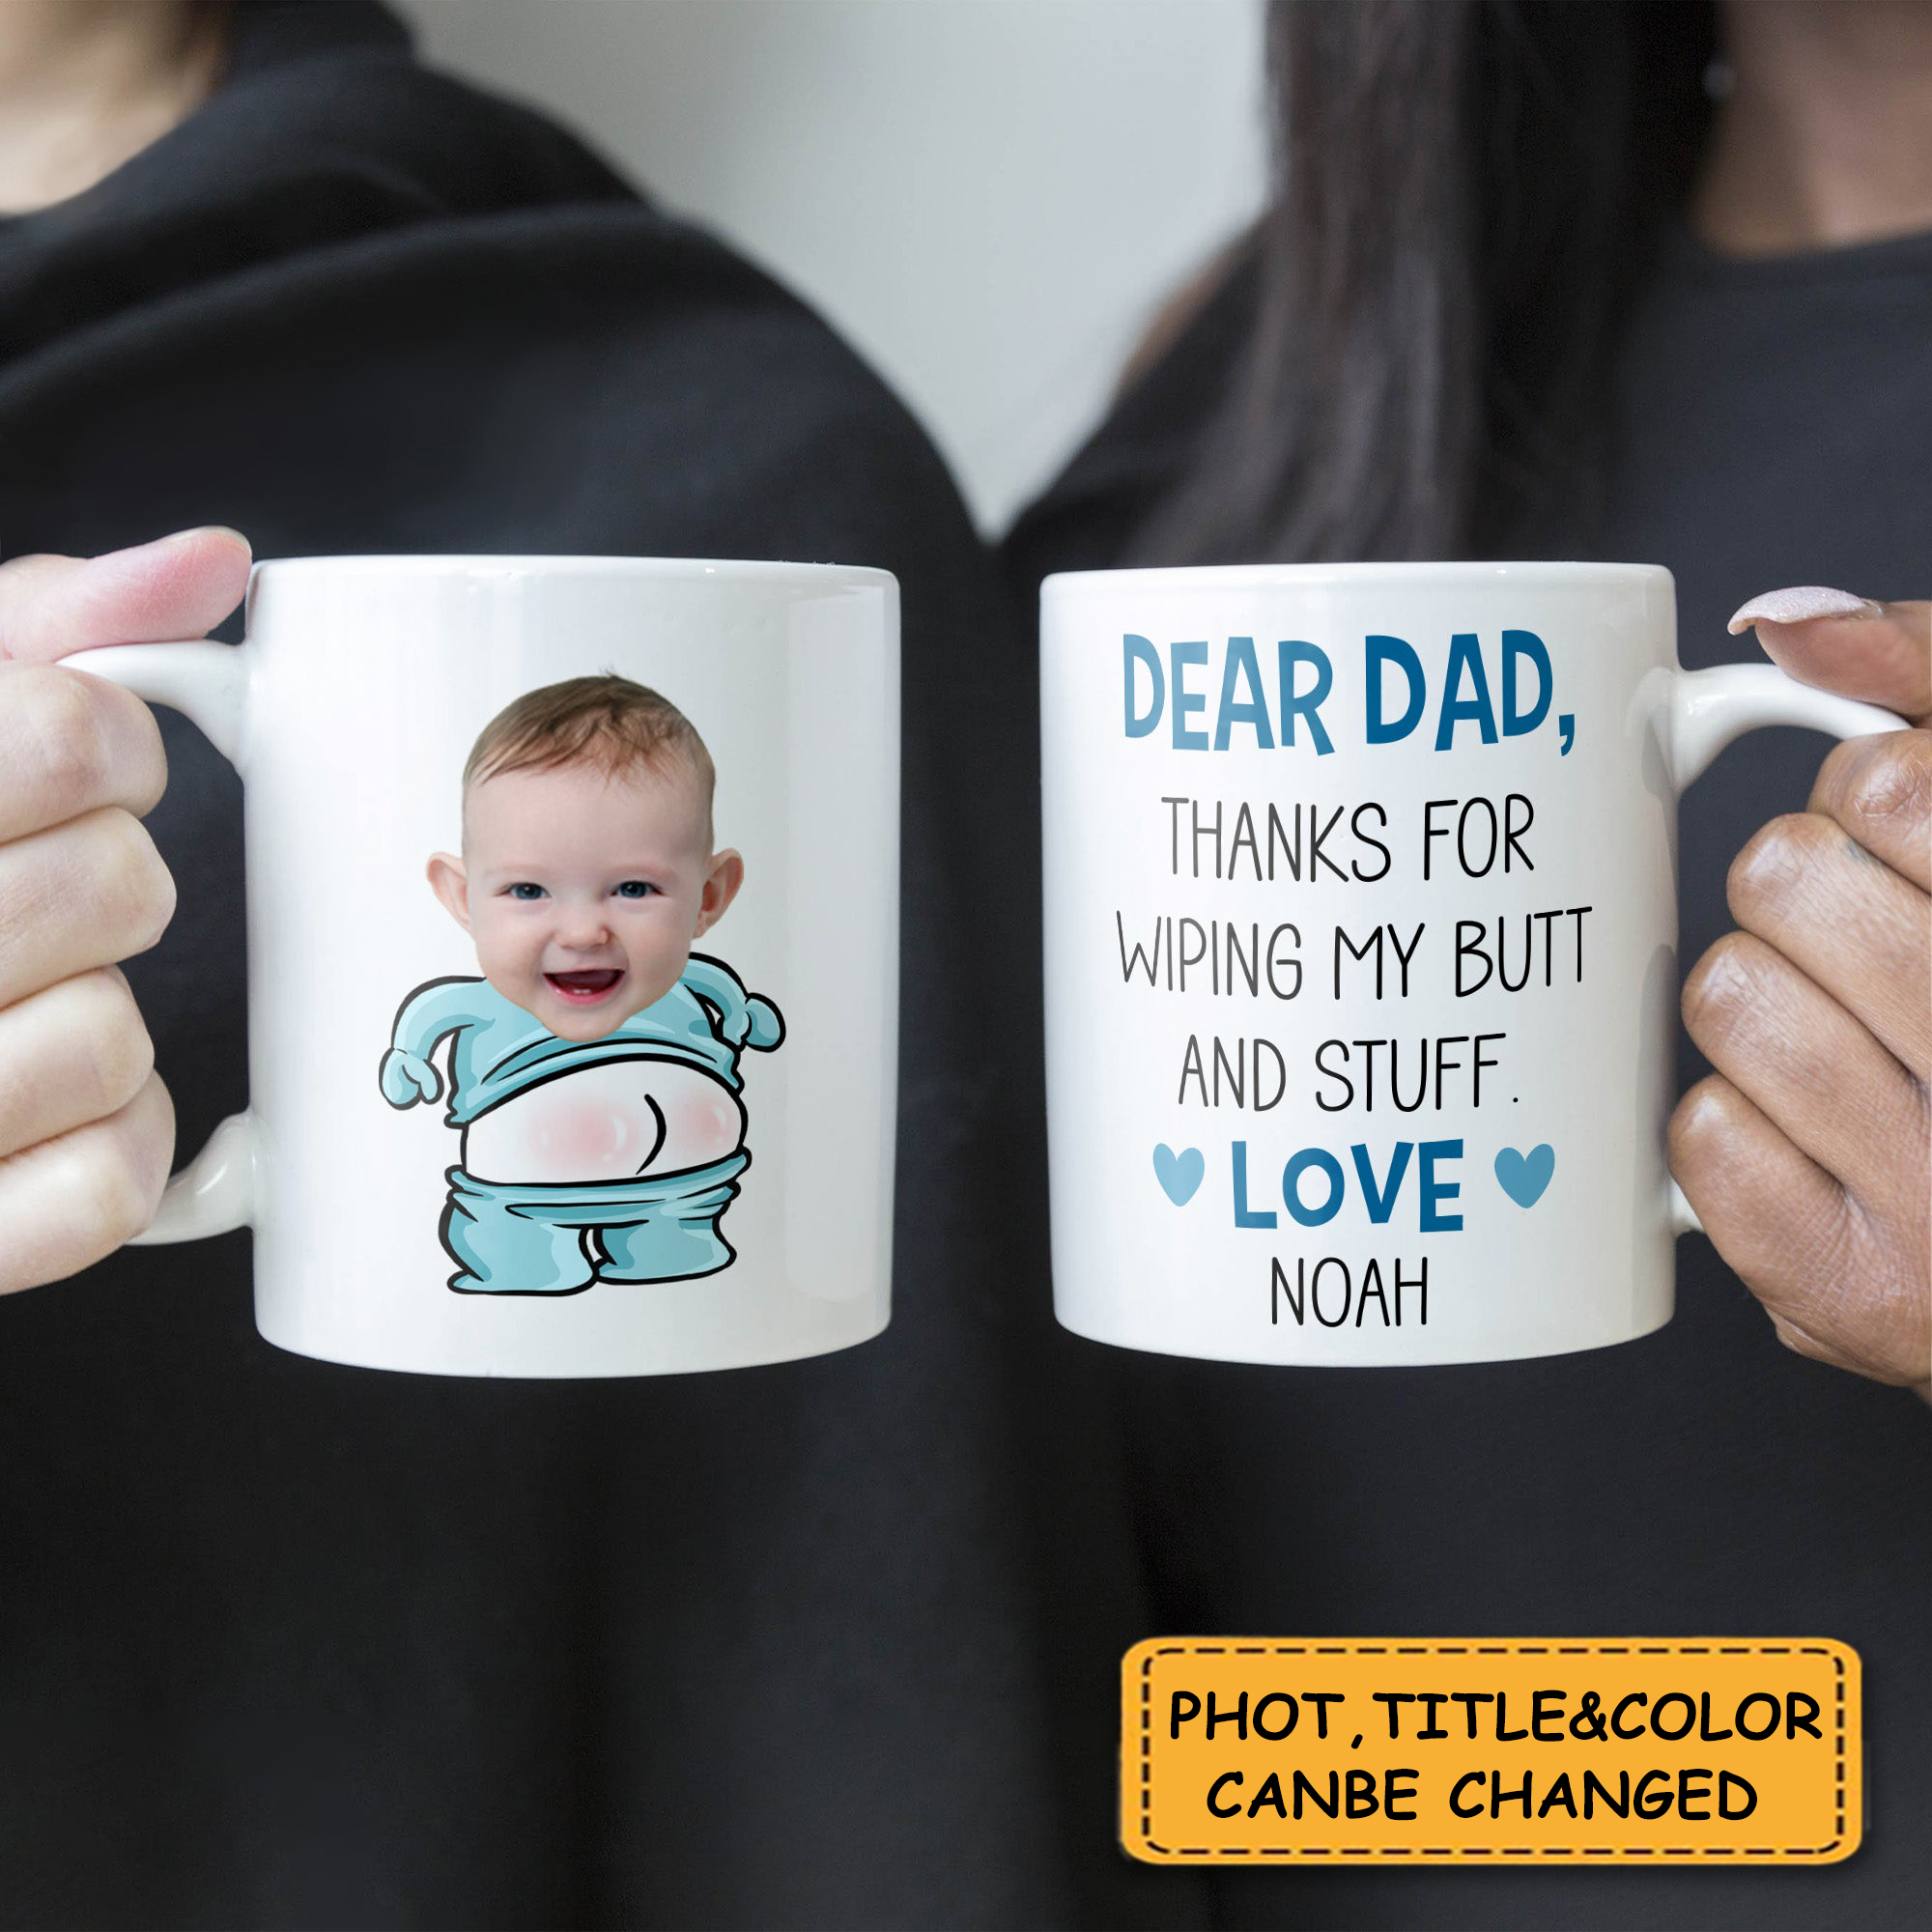 Dear Dad, Thanks For Wiping My Butt And Stuff - Personalized Mug